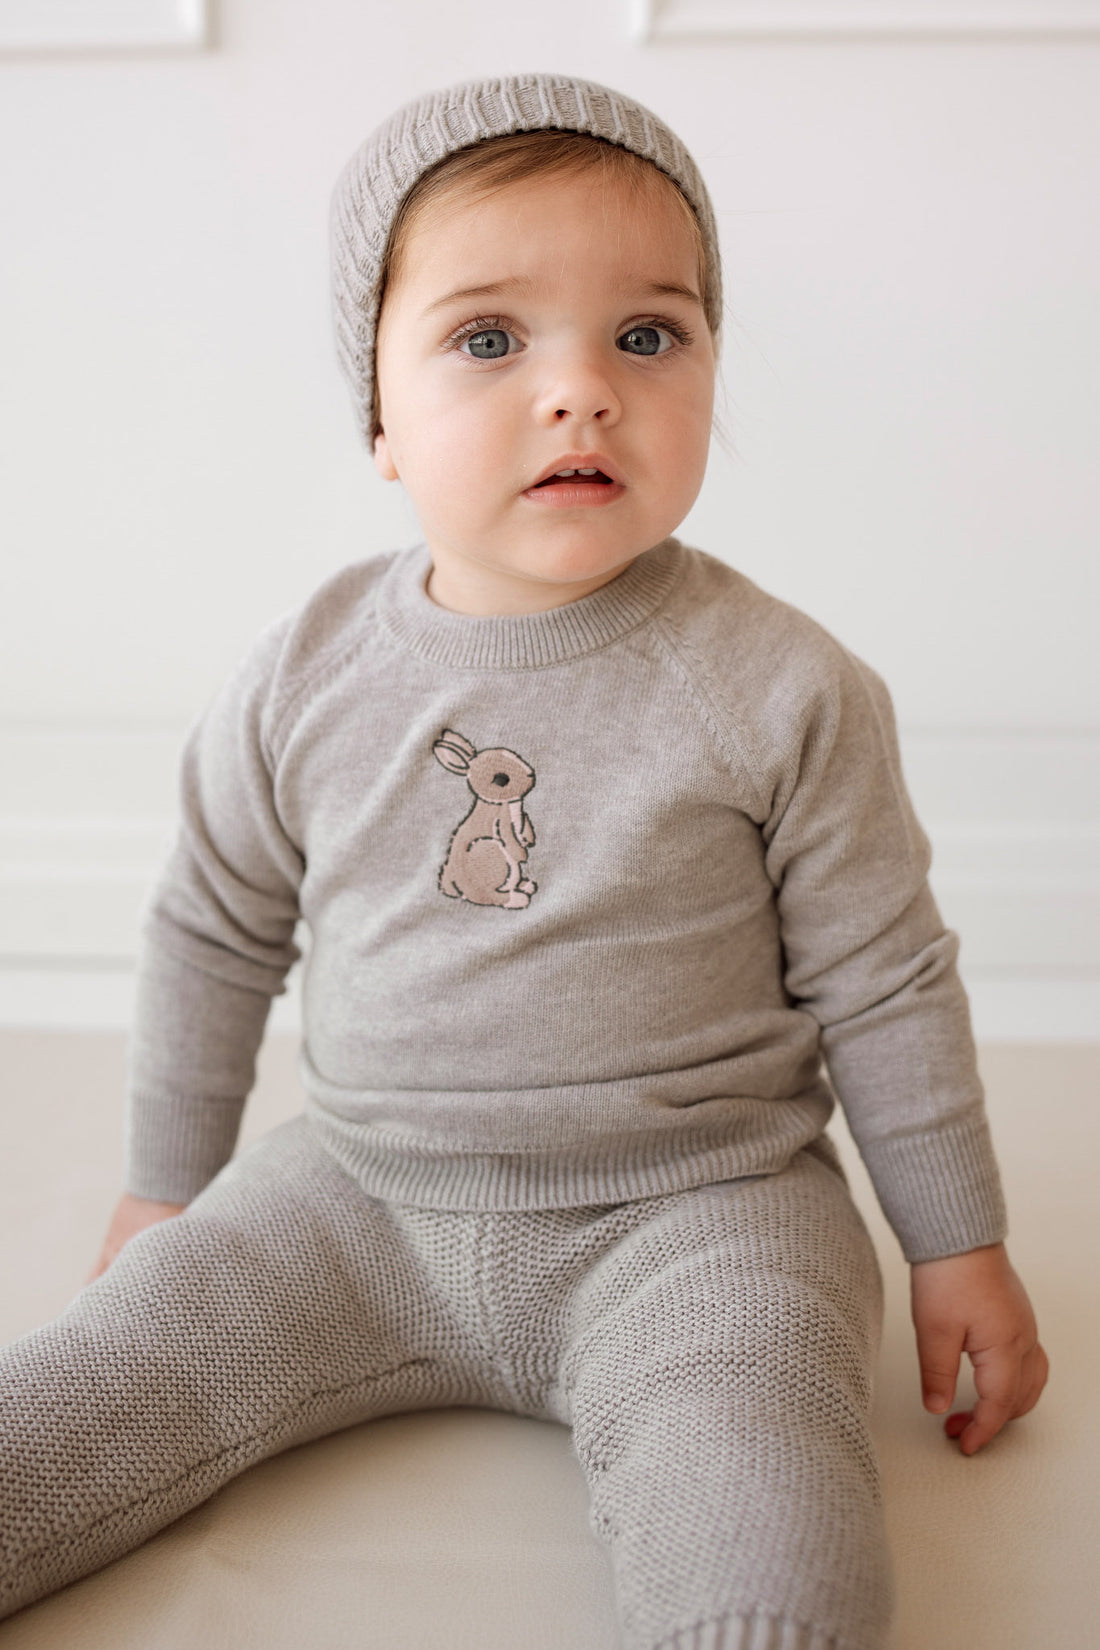 Mable Jumper - Bunny Marle Childrens Jumper from Jamie Kay NZ